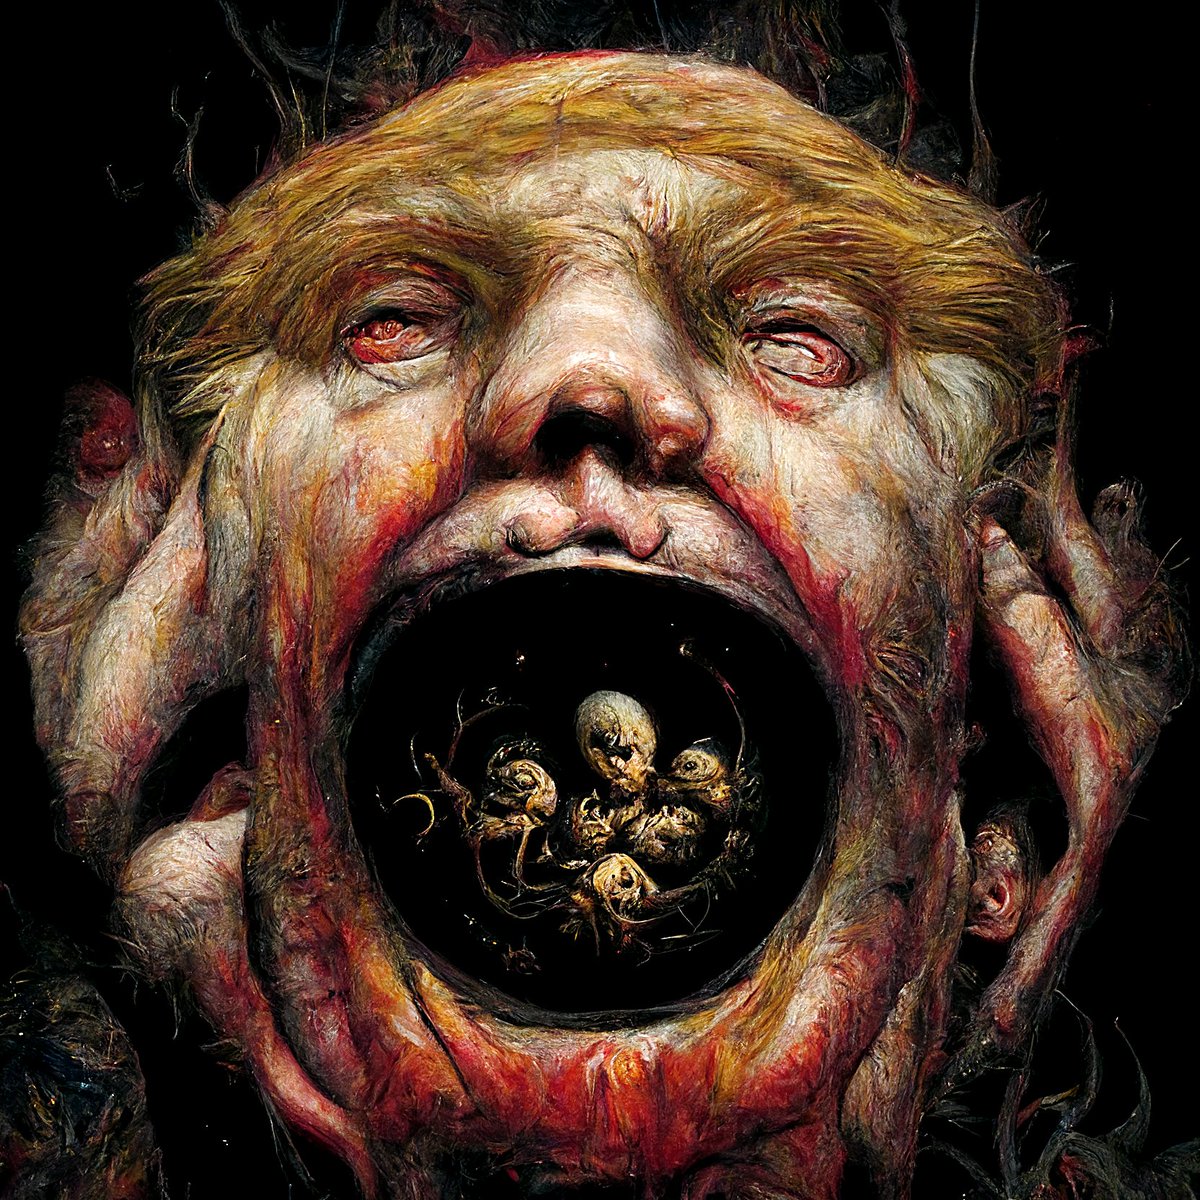 Midjourney Prompt:

Donald Trump devouring his sons in the style of Francisco Goya's Saturn devouring his son 

Umpteenth variant generation https://t.co/sgqSxy3Zov